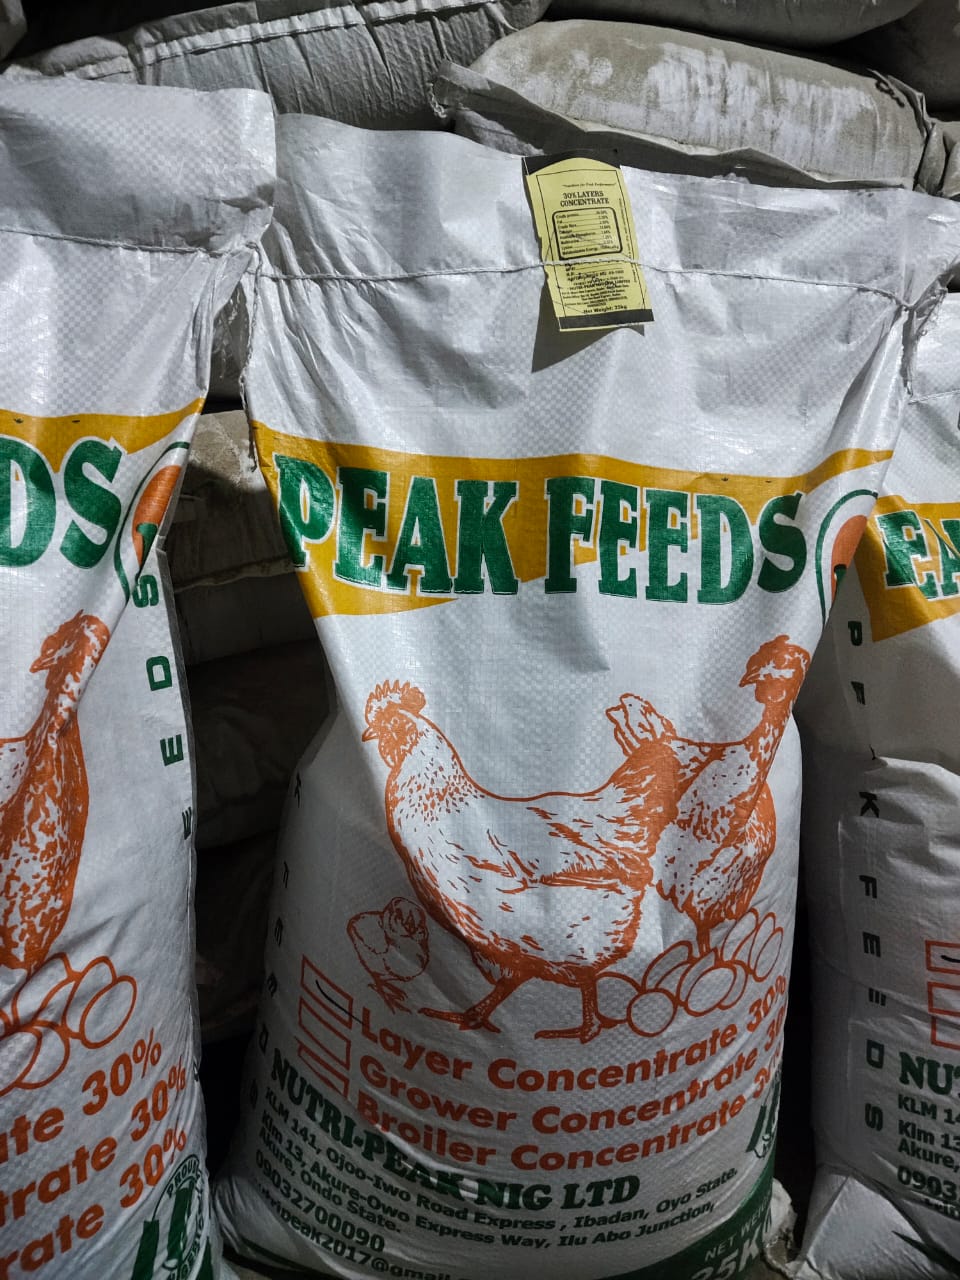 Grower Concentrate ( Peak Feed Brand)